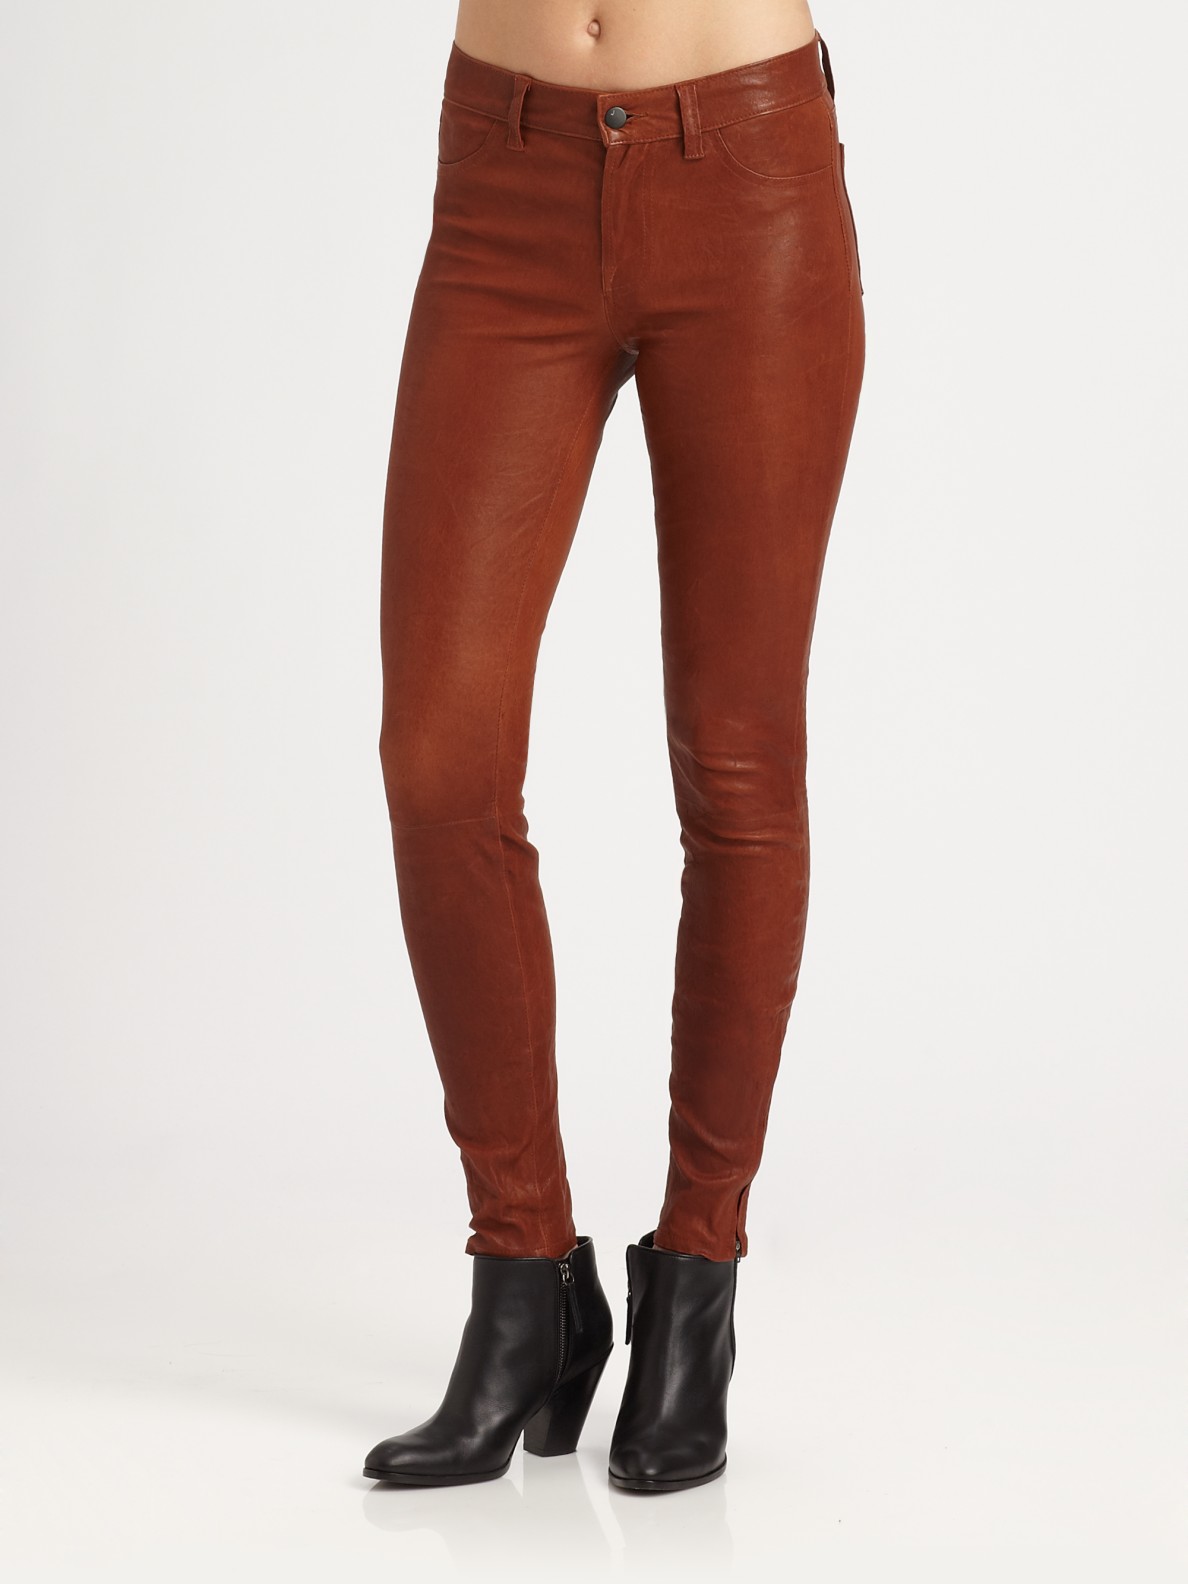 J brand Lea Midrise Leather Jeans in Brown | Lyst